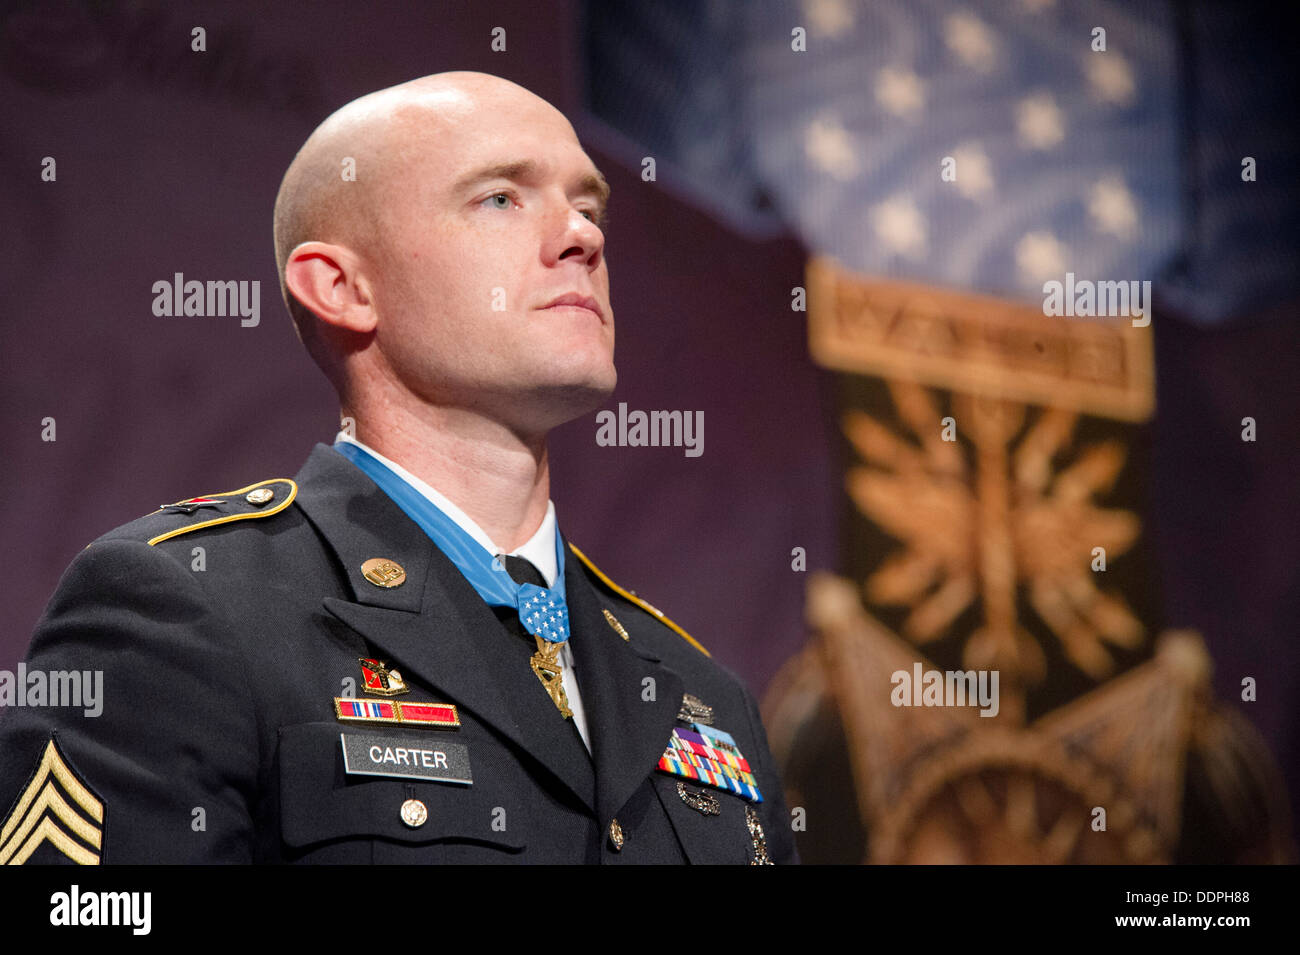 Pictured is the Medal of Honor Hall of Heroes Induction Ceremony in honor of U.S. Army Staff Sgt. Ty Michael Carter, in the Pentagon Auditorium, Aug. 27, 2013. Stock Photo